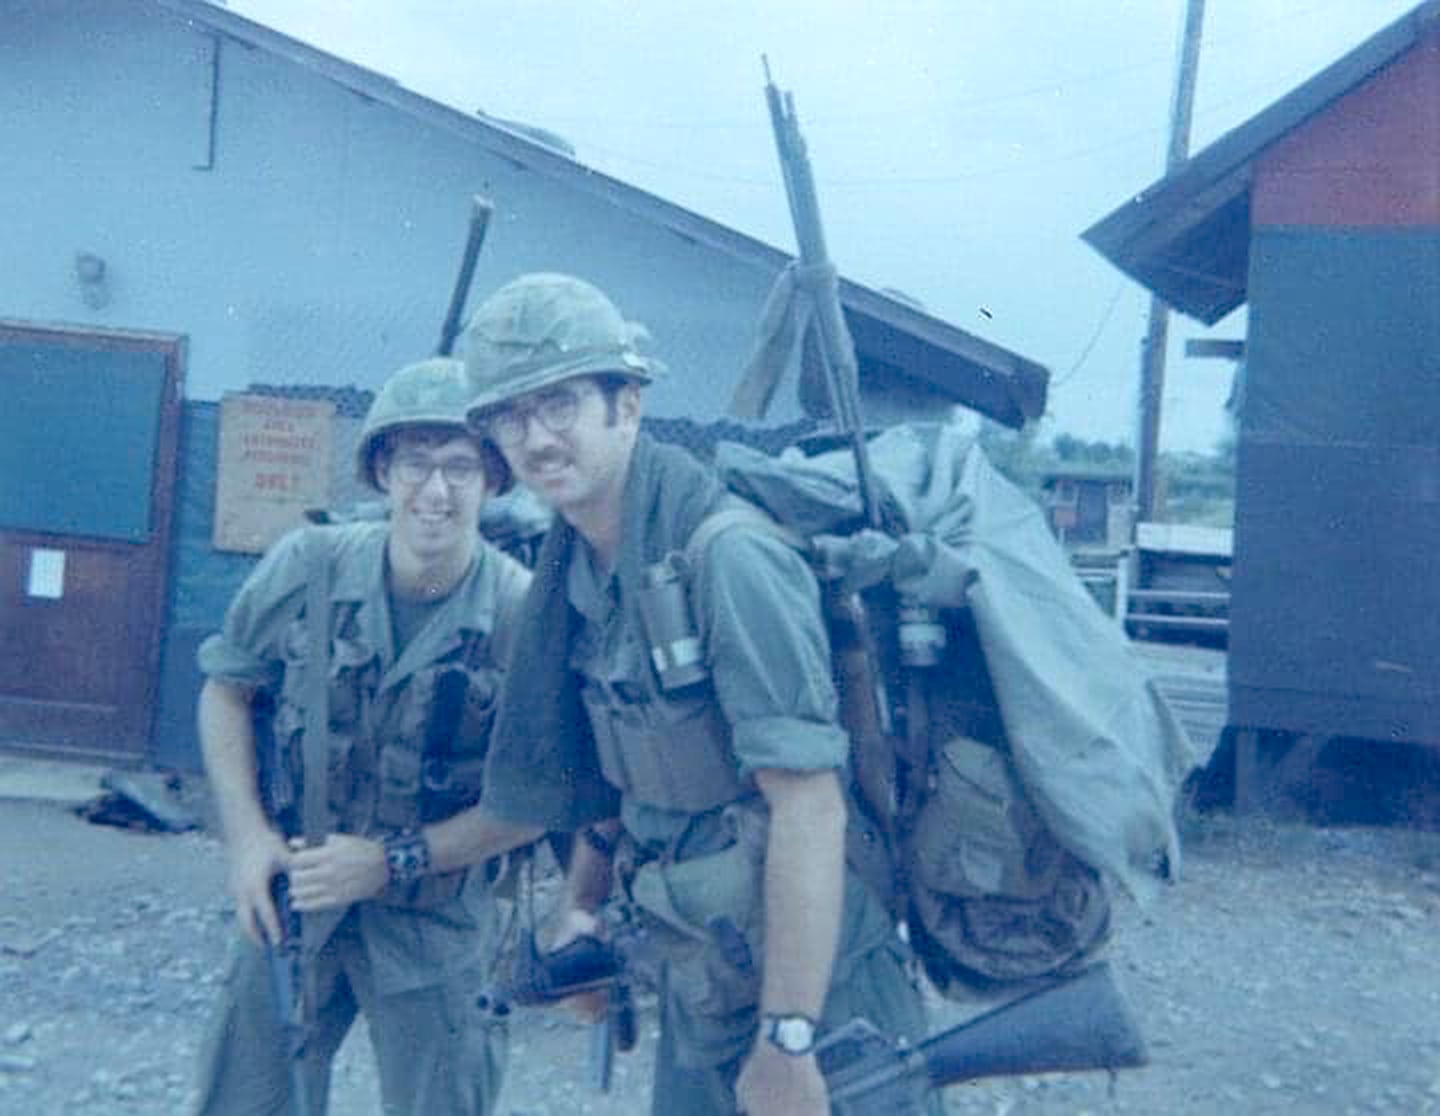 Ted Mottaz (right), an infantry company radio operator, and a fellow soldier wait for a helicopter with radio and packs ready while in Vietnam. The west-central Illinois farmer was drafted in 1971 during his first year of teaching ag at Carthage High School.